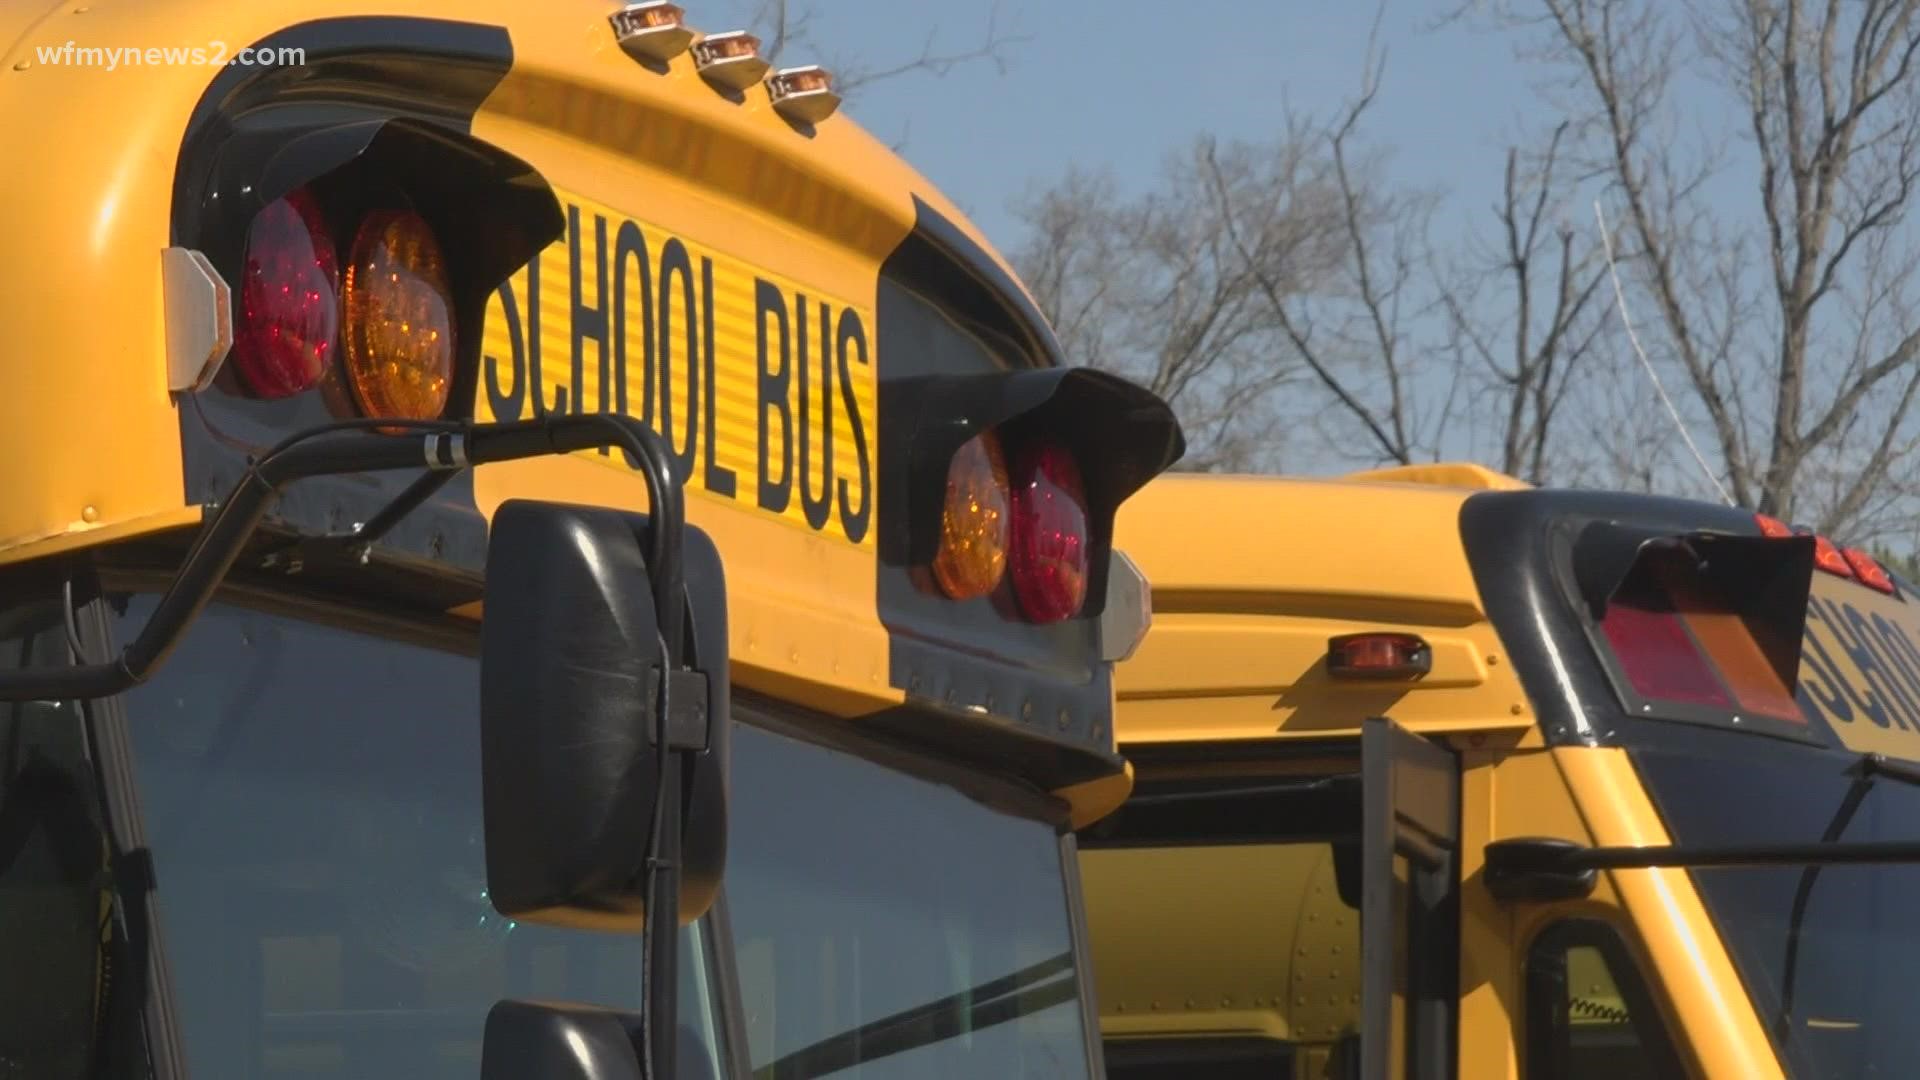 Wednesday, the state superintendent wanted to make sure drivers who are working get a thank you